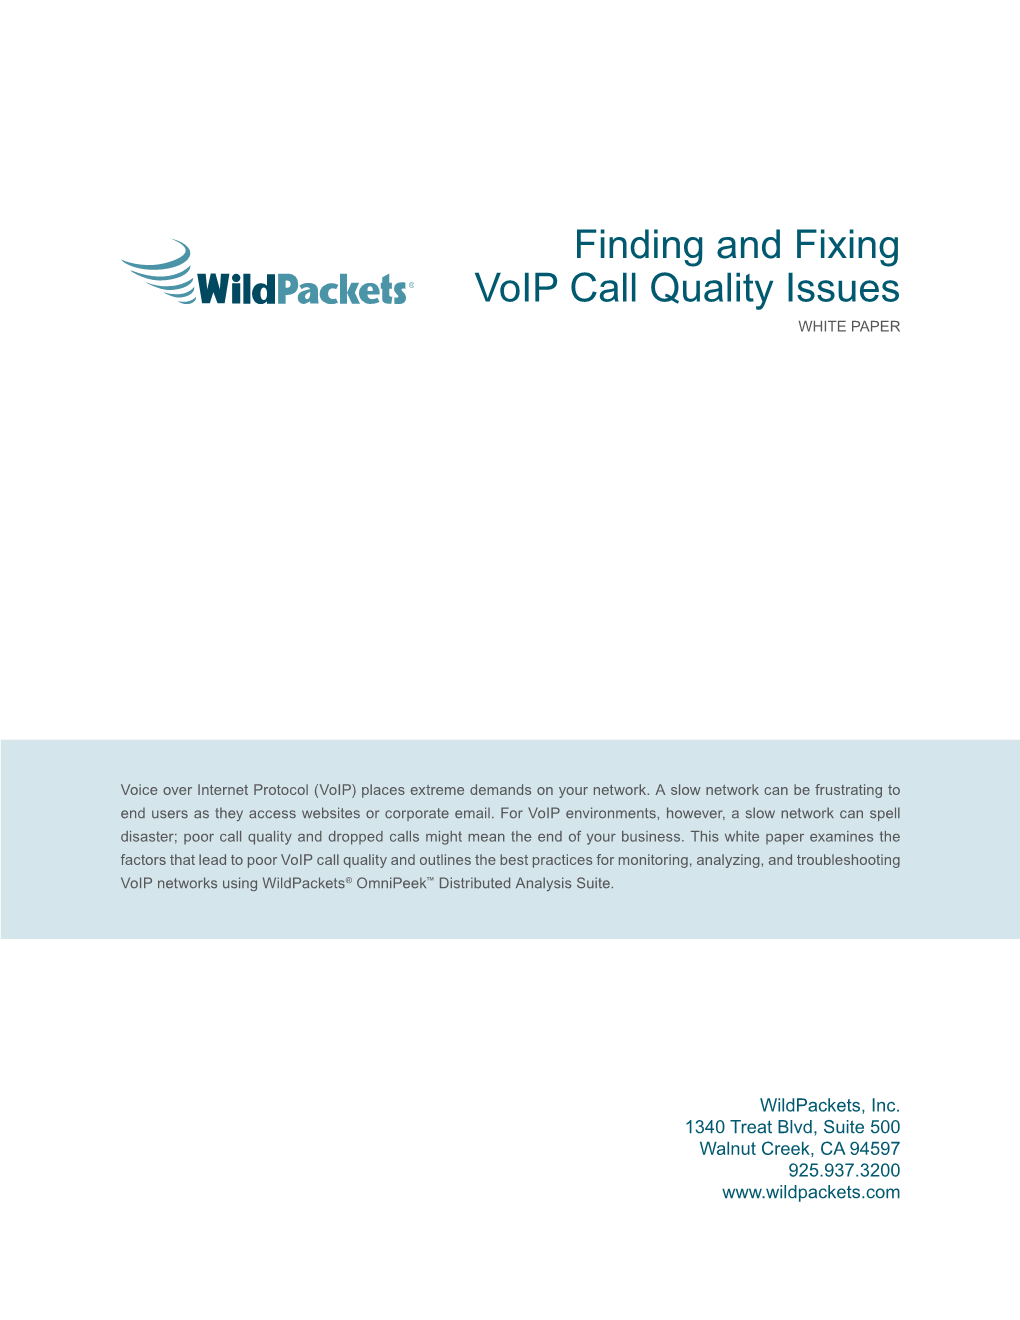 Finding and Fixing Voip Call Quality Issues WHITE PAPER